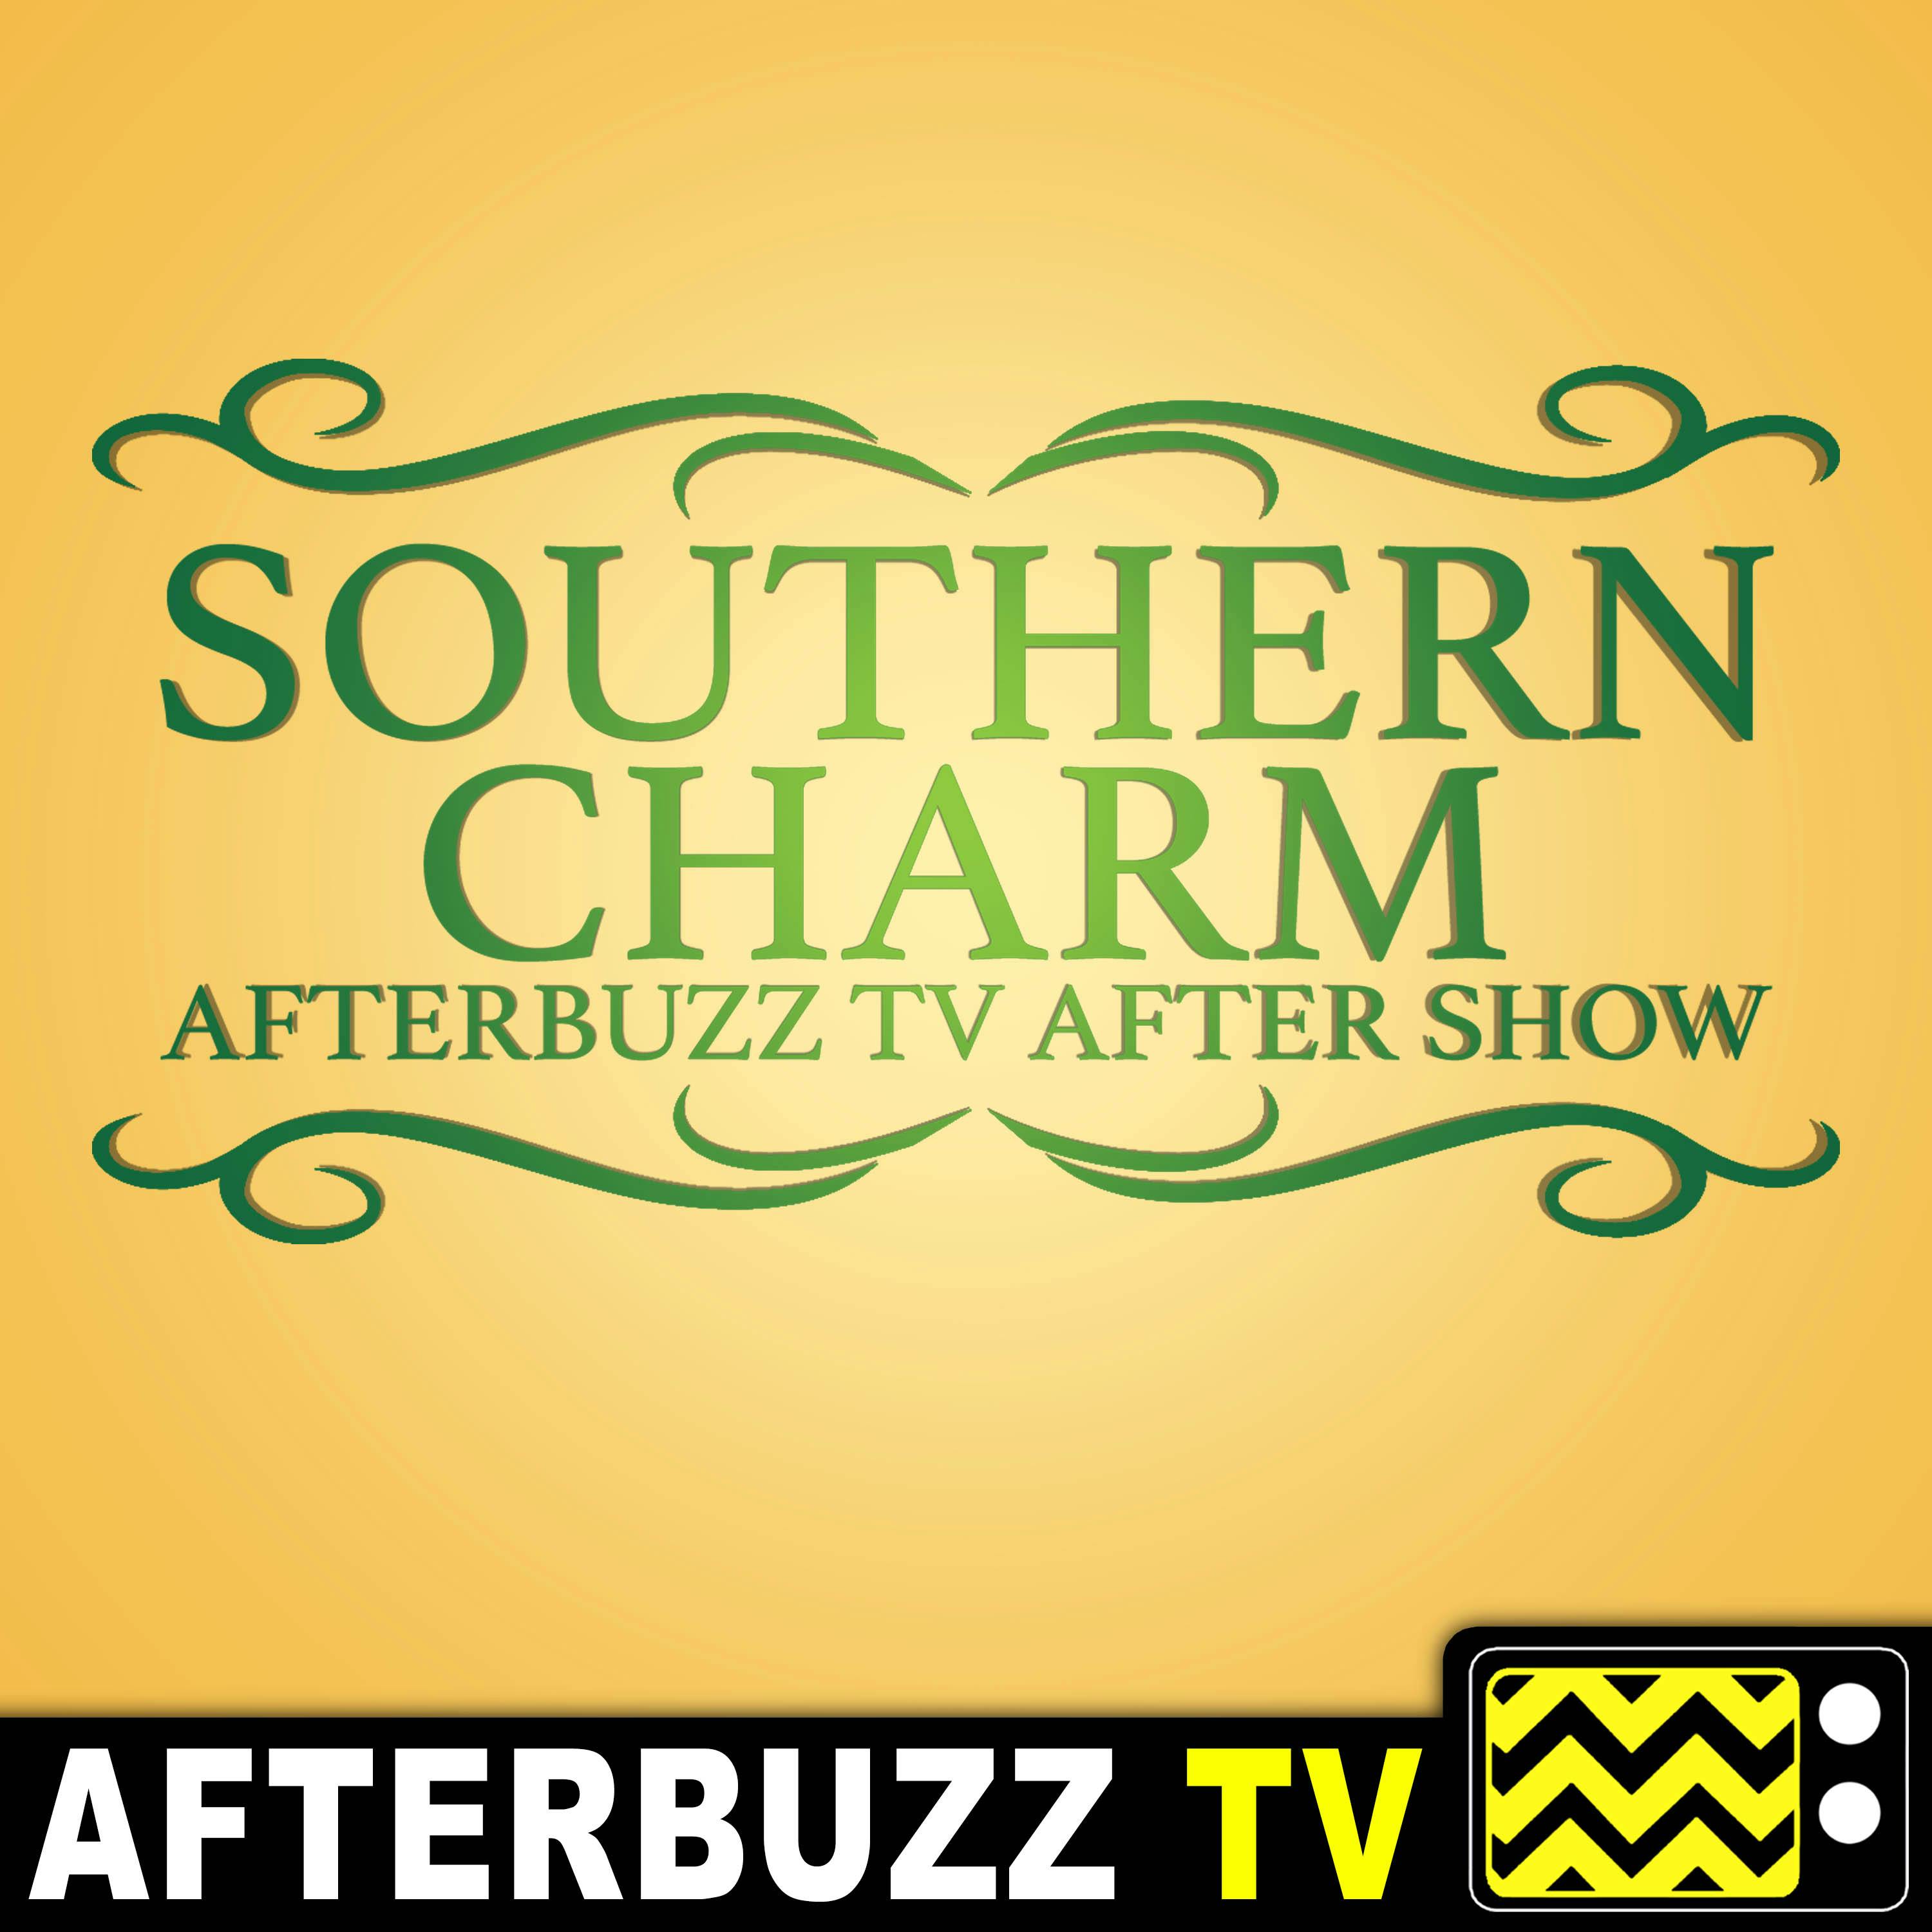 ”A Salt and Battery” Season 6 Episode 6 ’Southern Charm’ Review